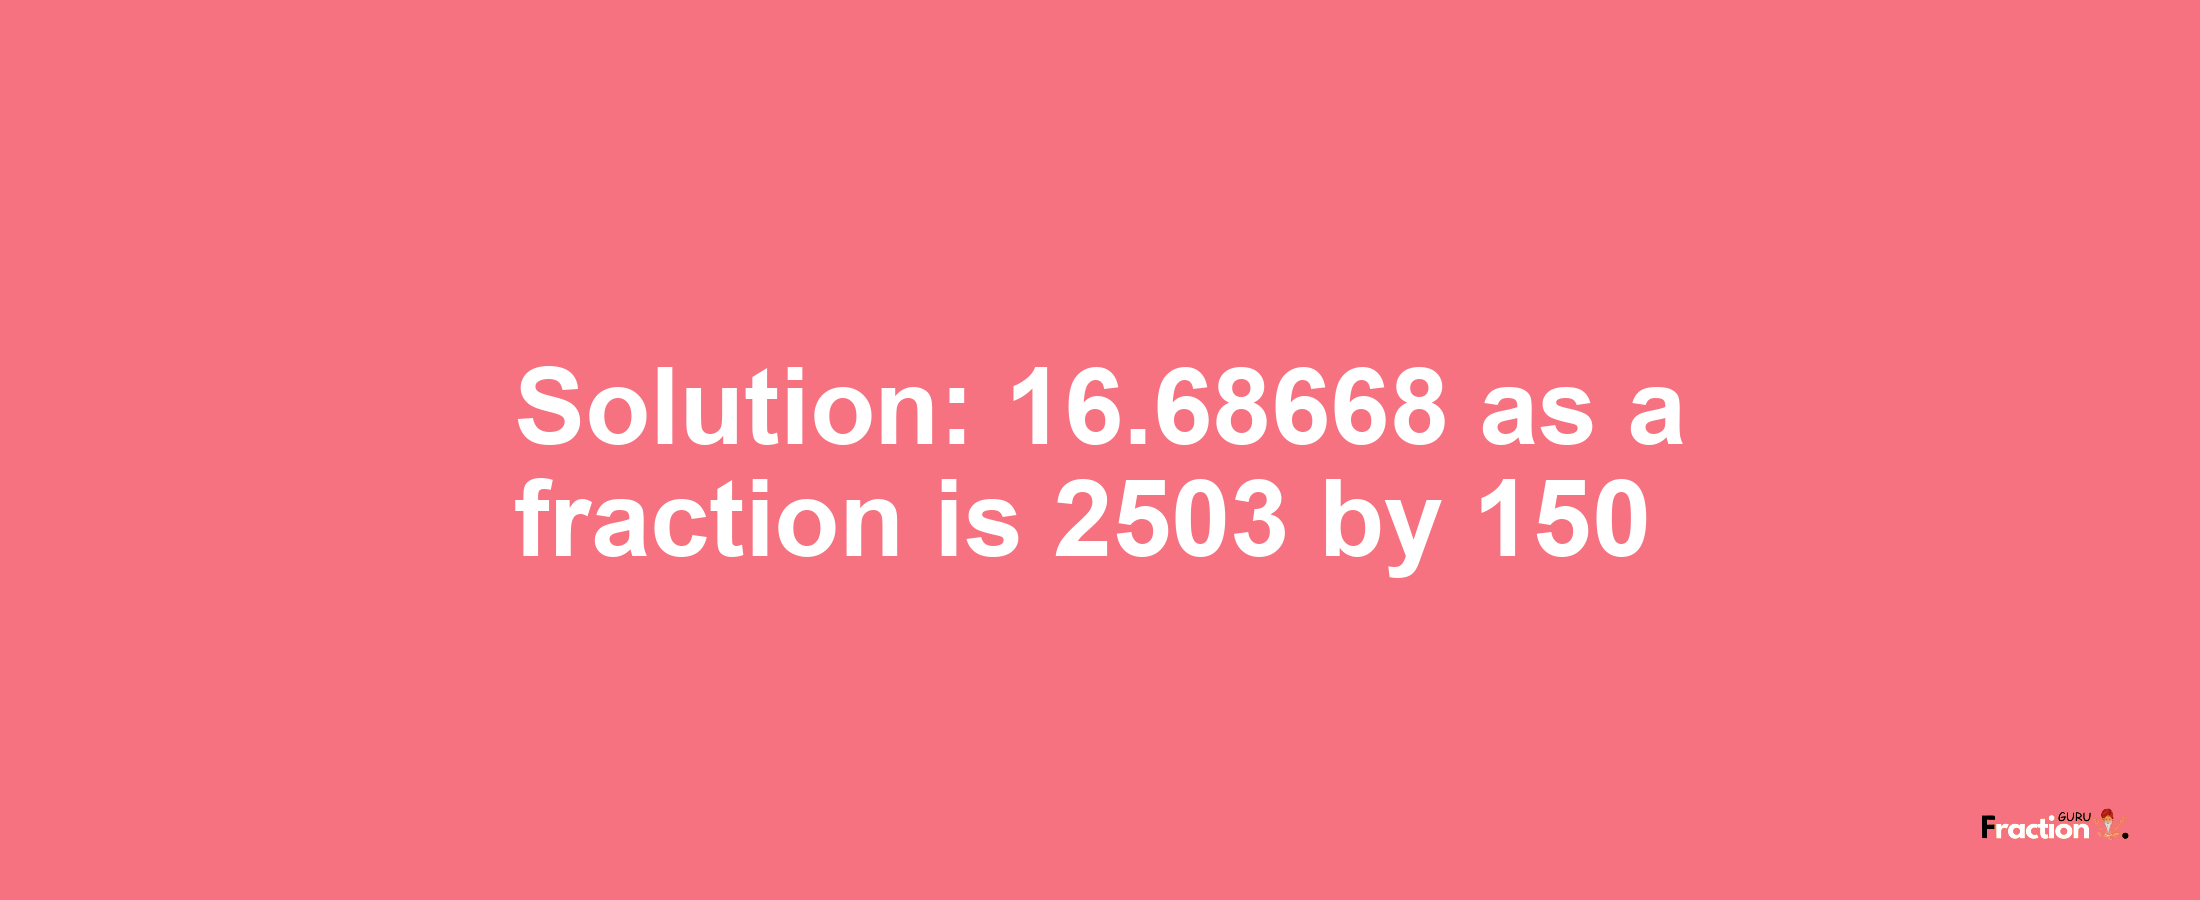 Solution:16.68668 as a fraction is 2503/150